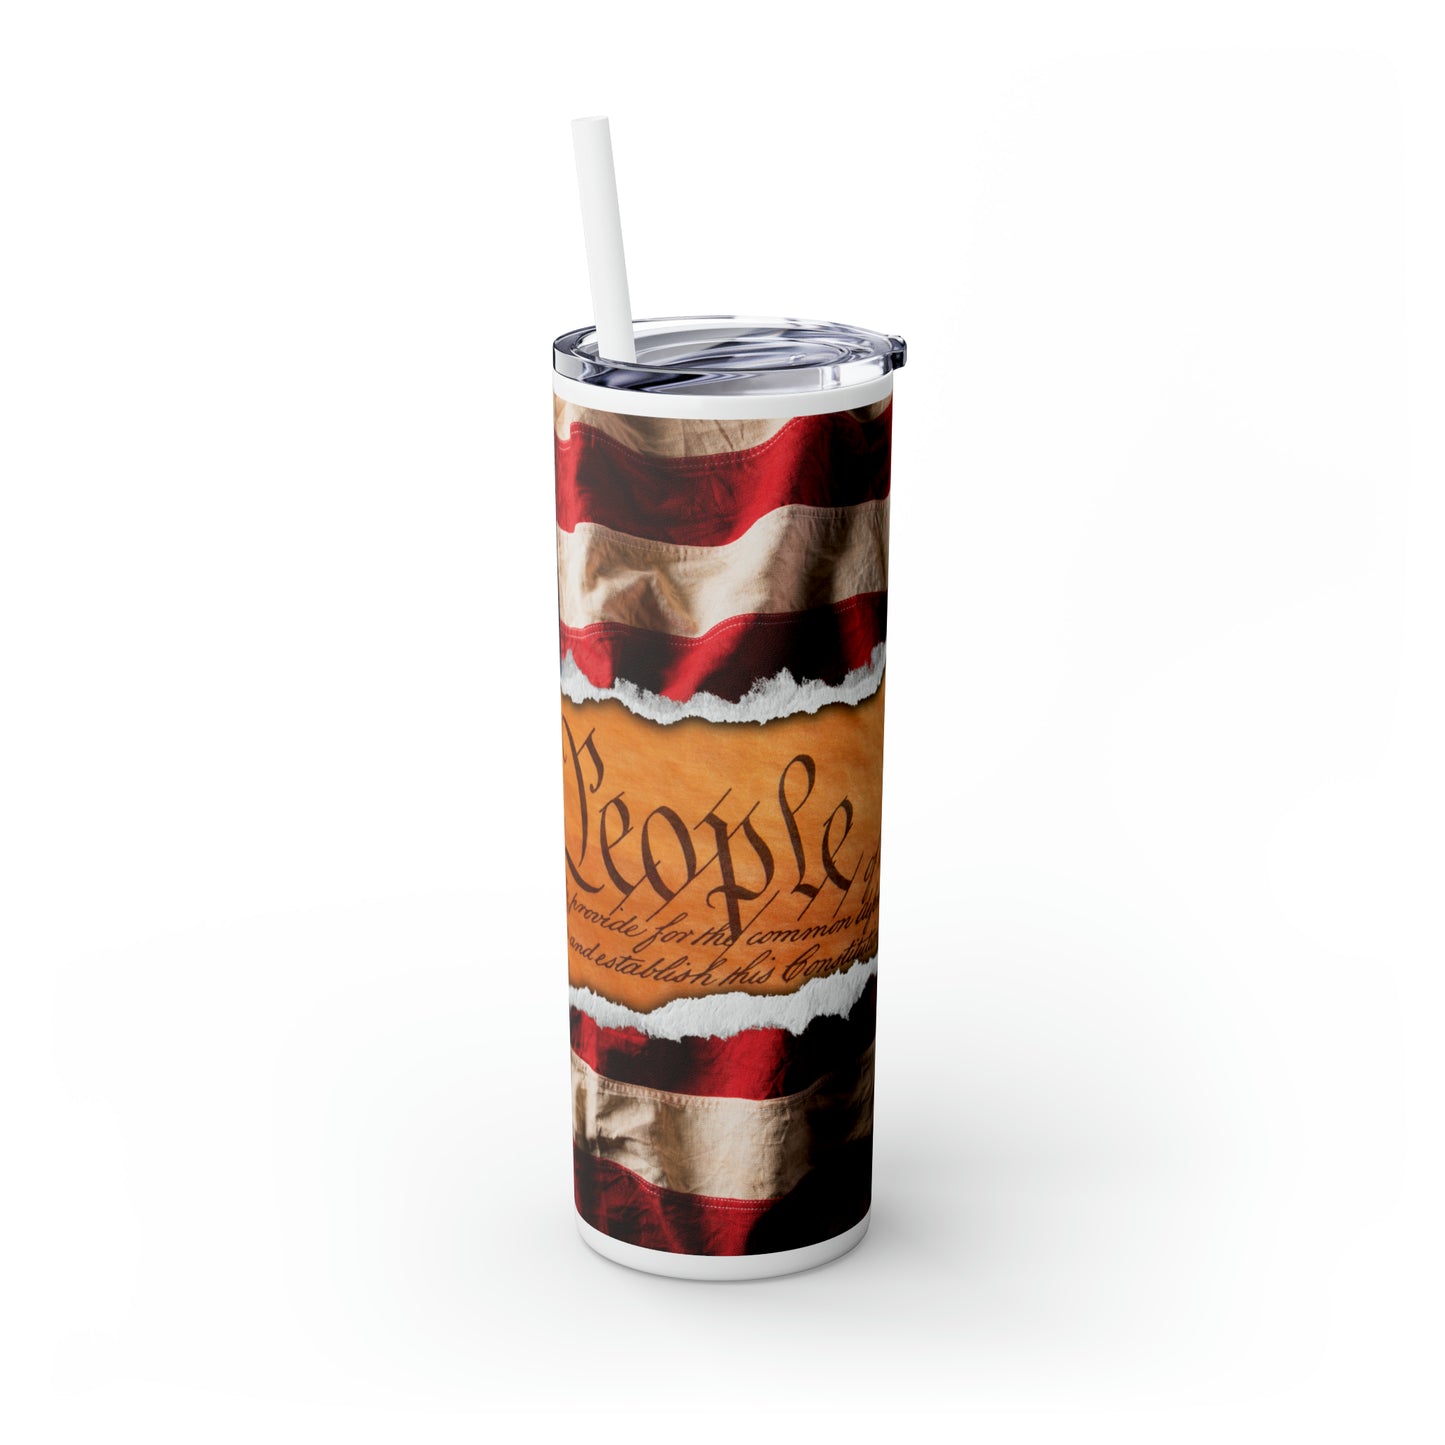 We The People American Flag Patriotic Tumbler with Straw, 20oz